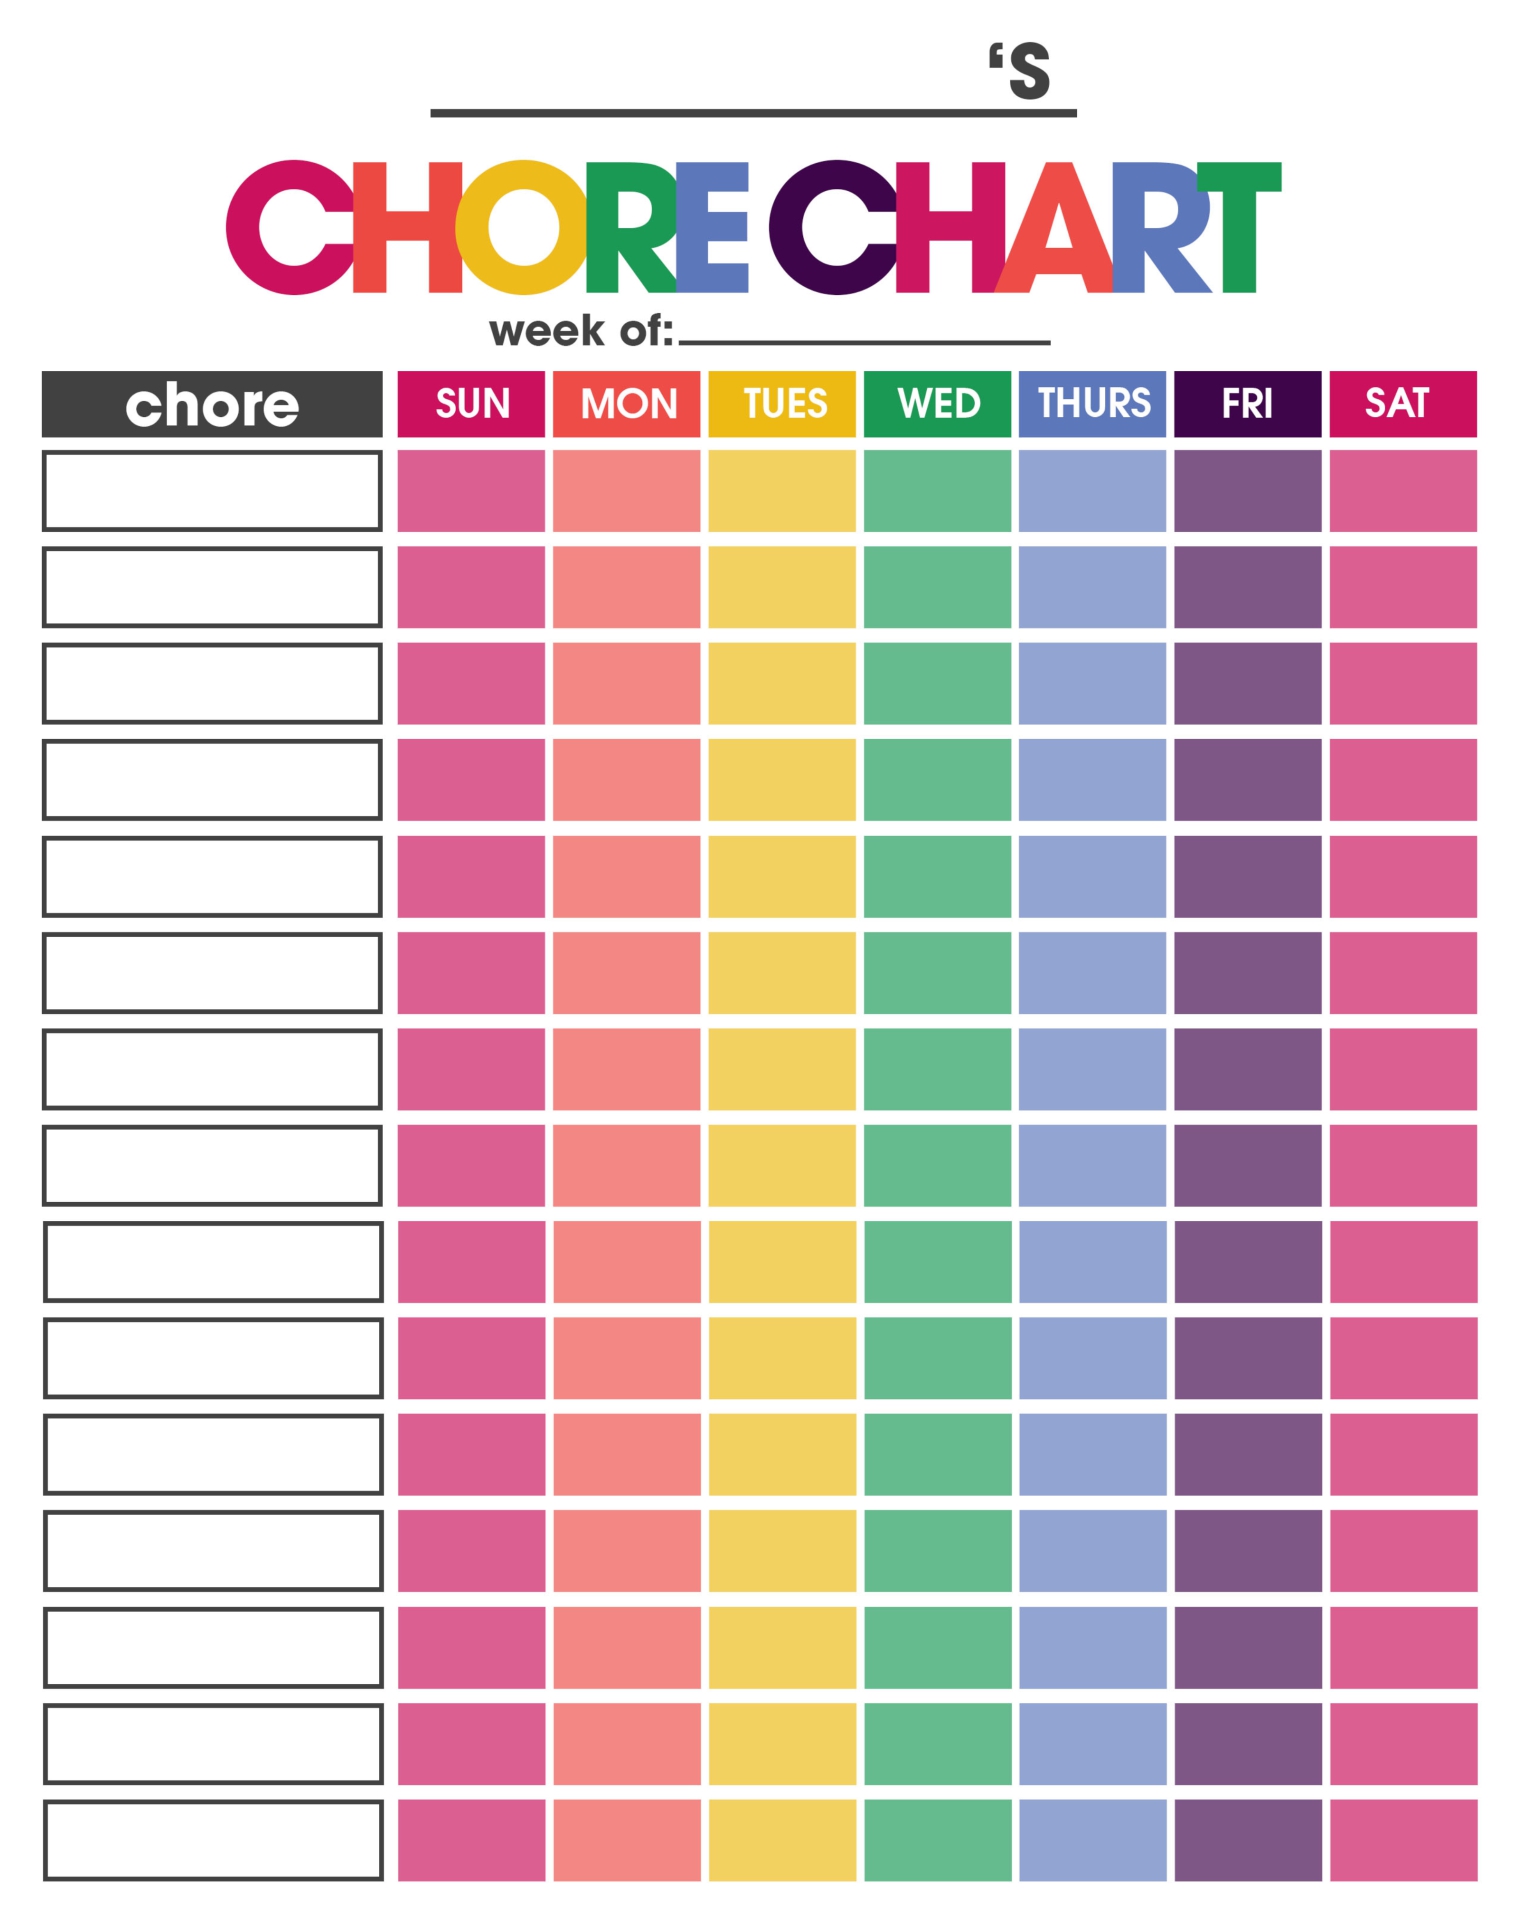 chores-chart-for-family